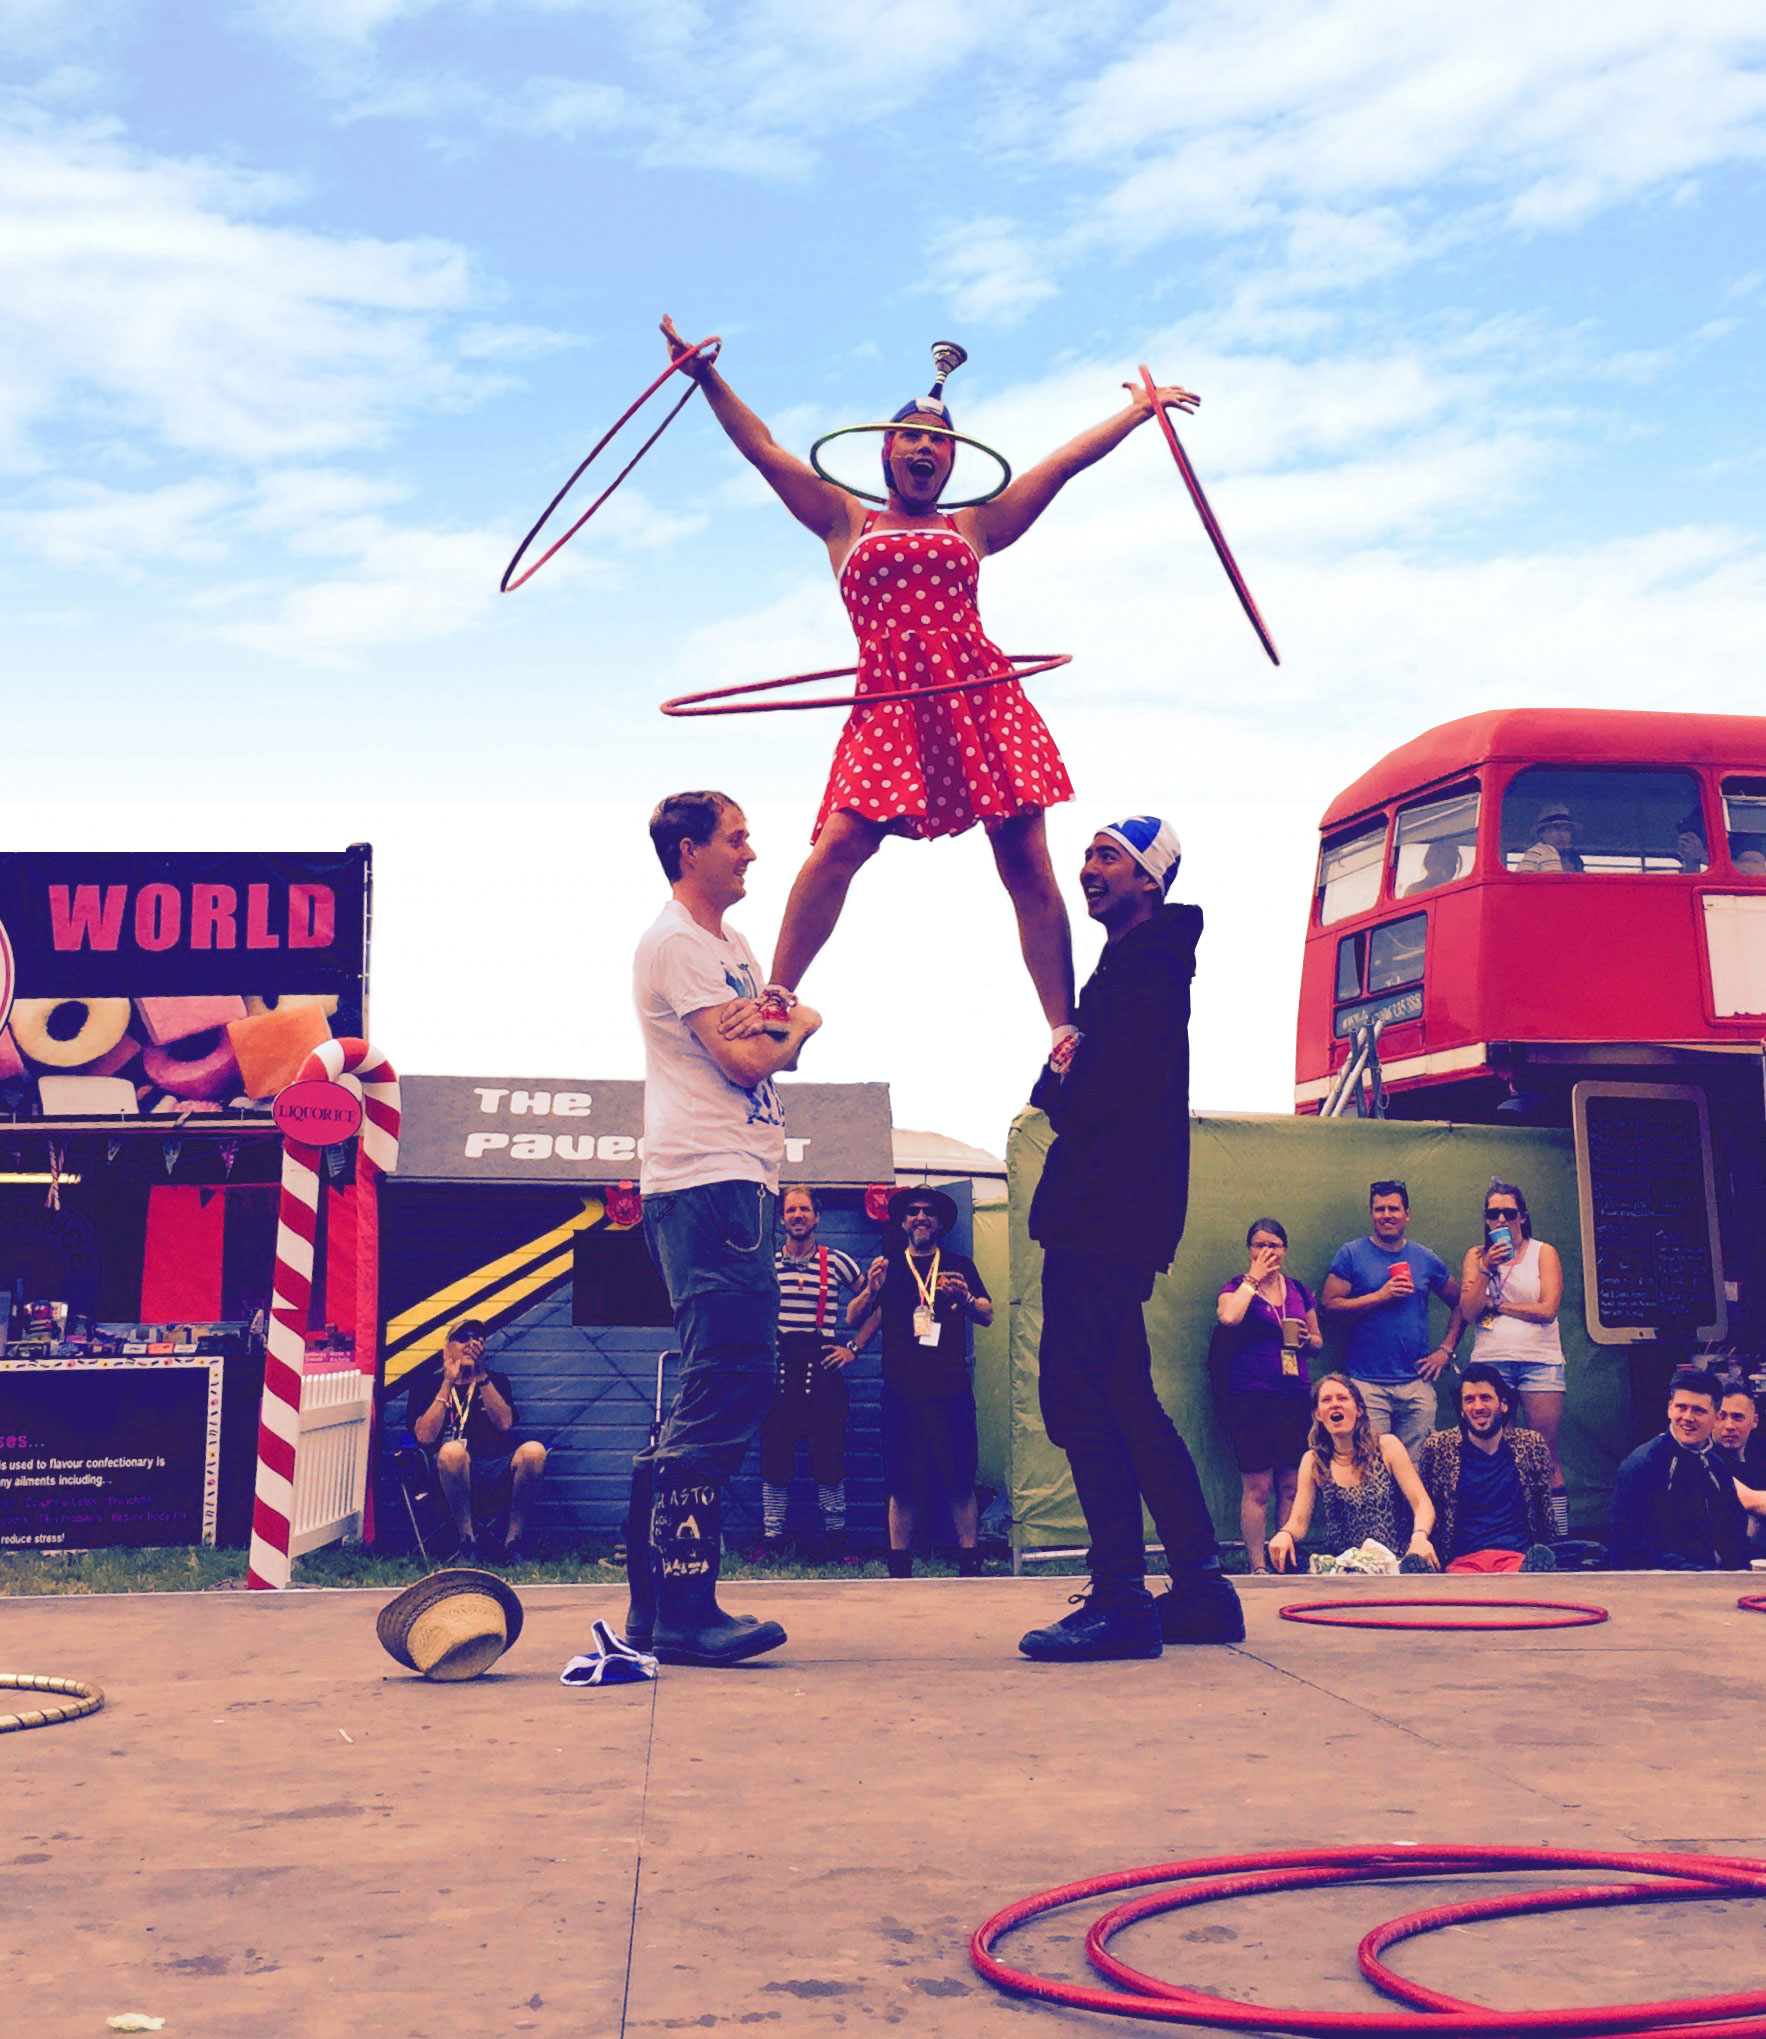 One of the street circus acts performing earlier this year